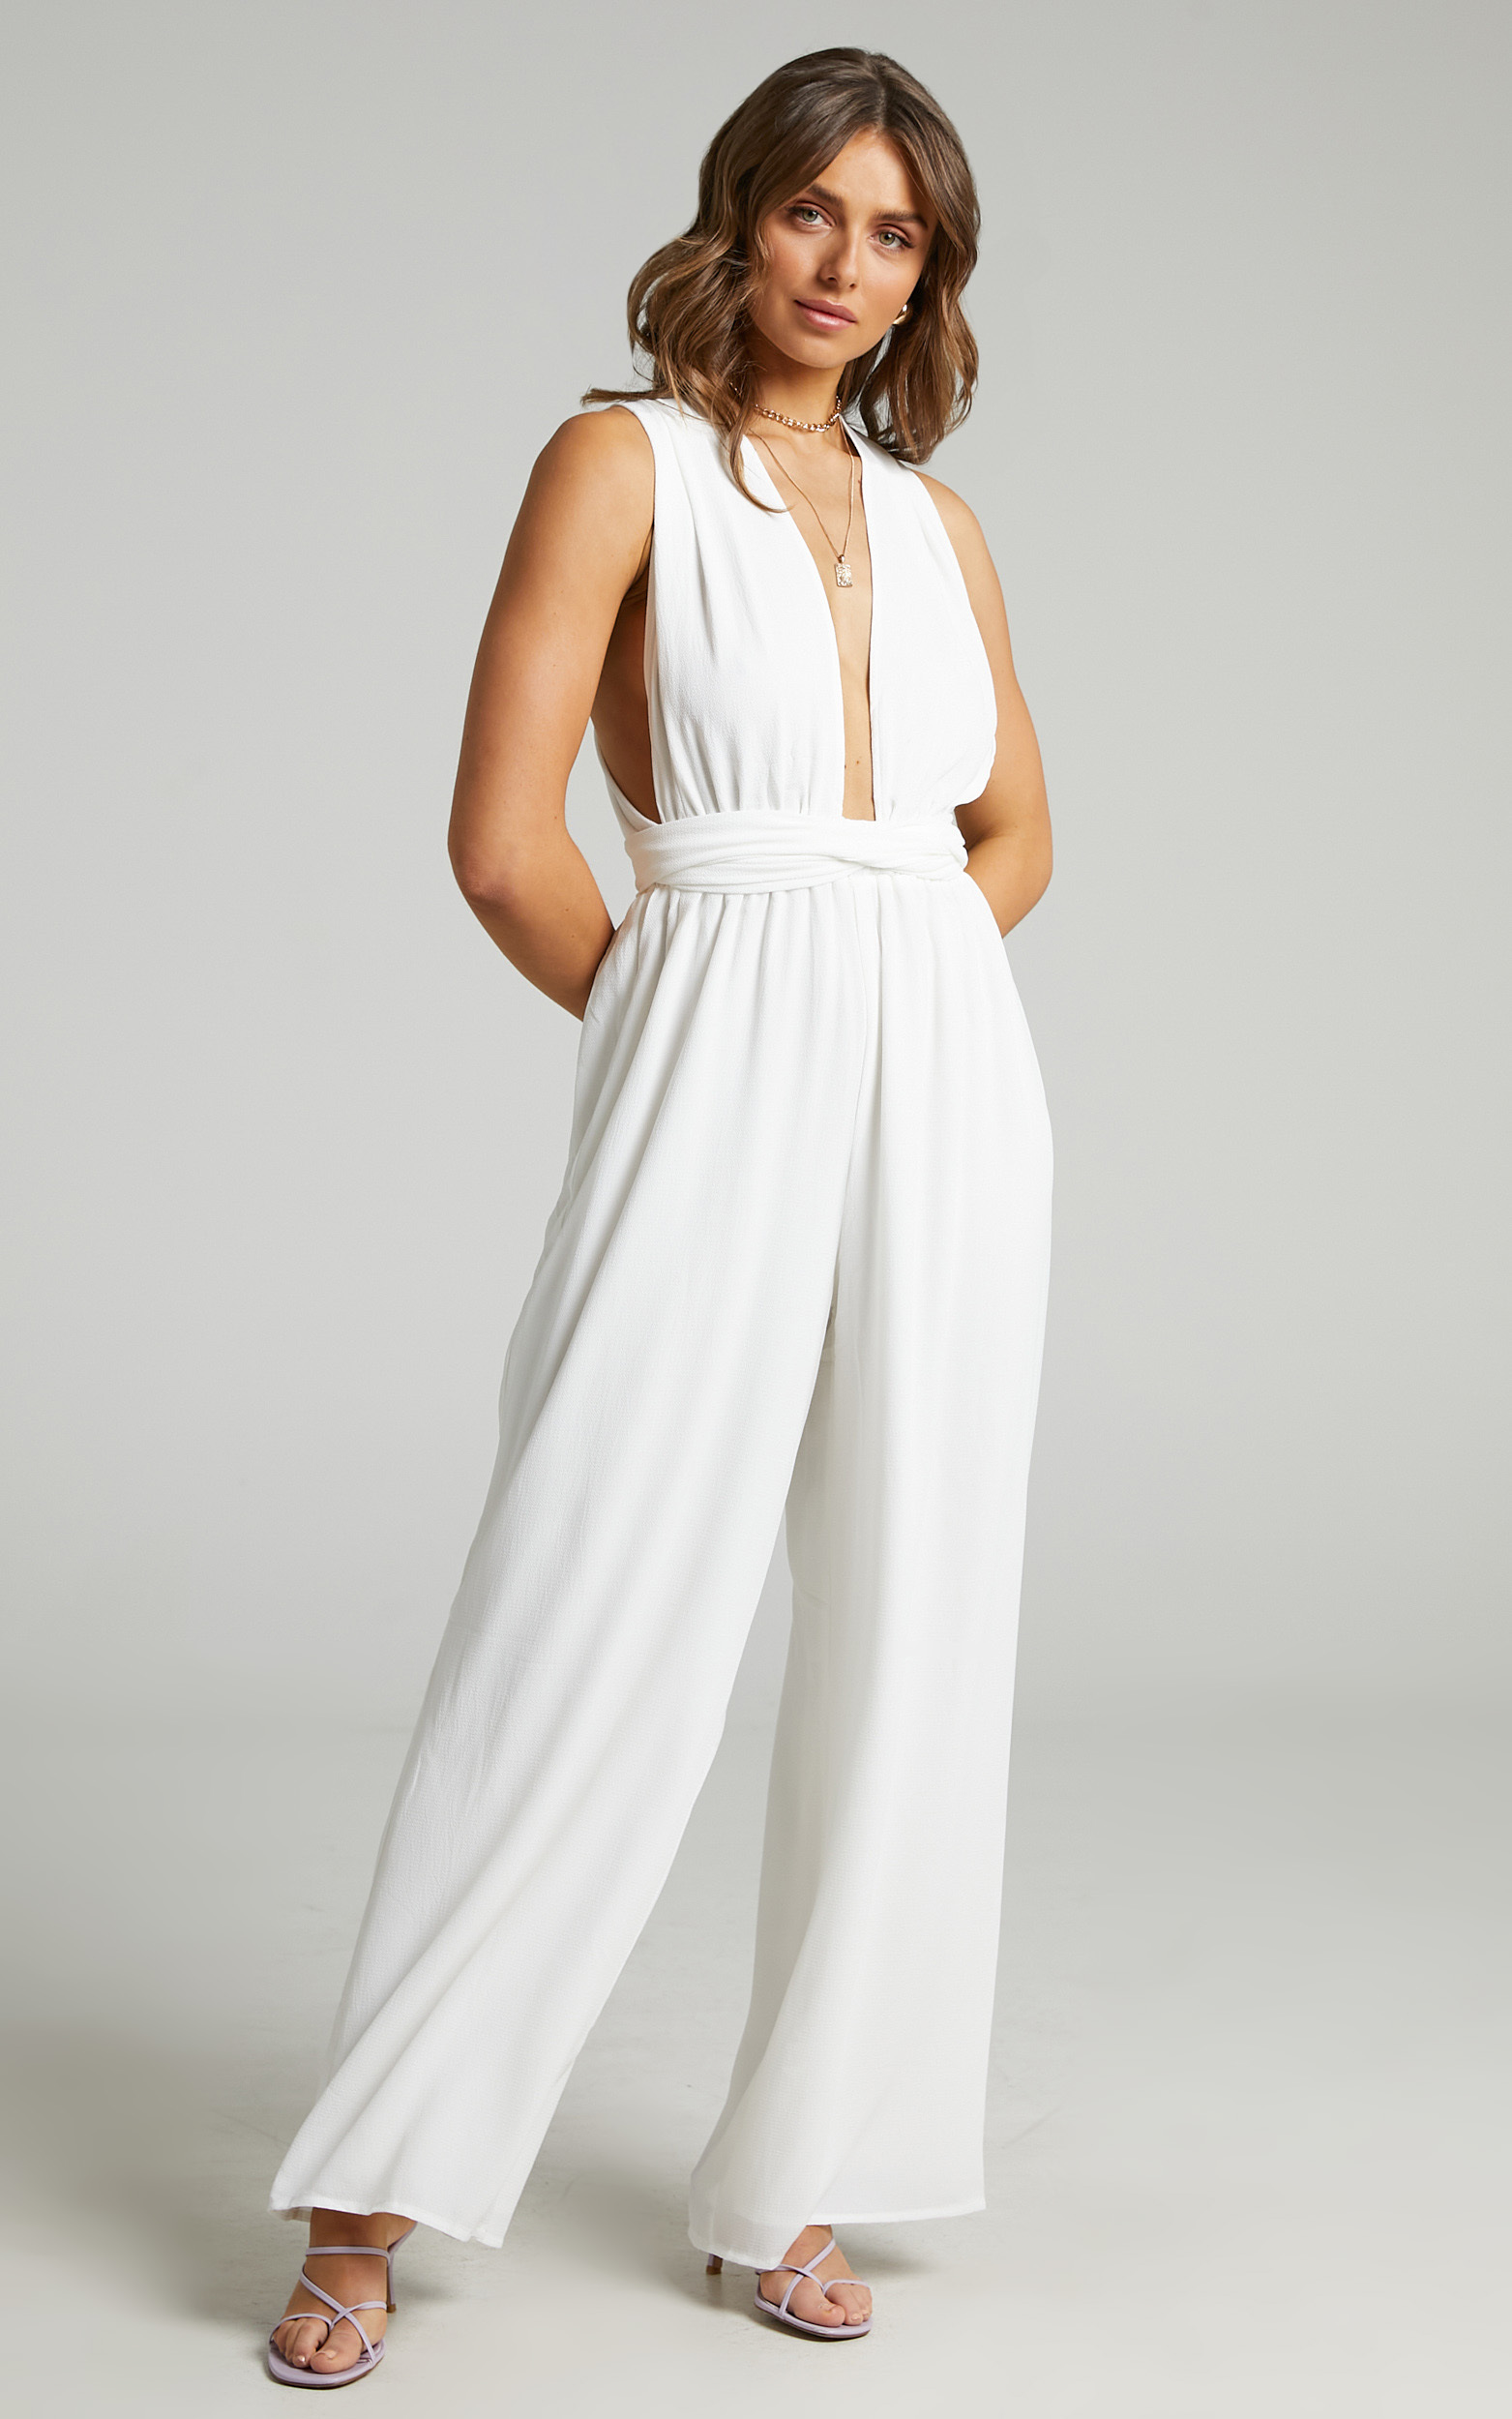 Girls Life Jumpsuit in White - 04, WHT6, hi-res image number null